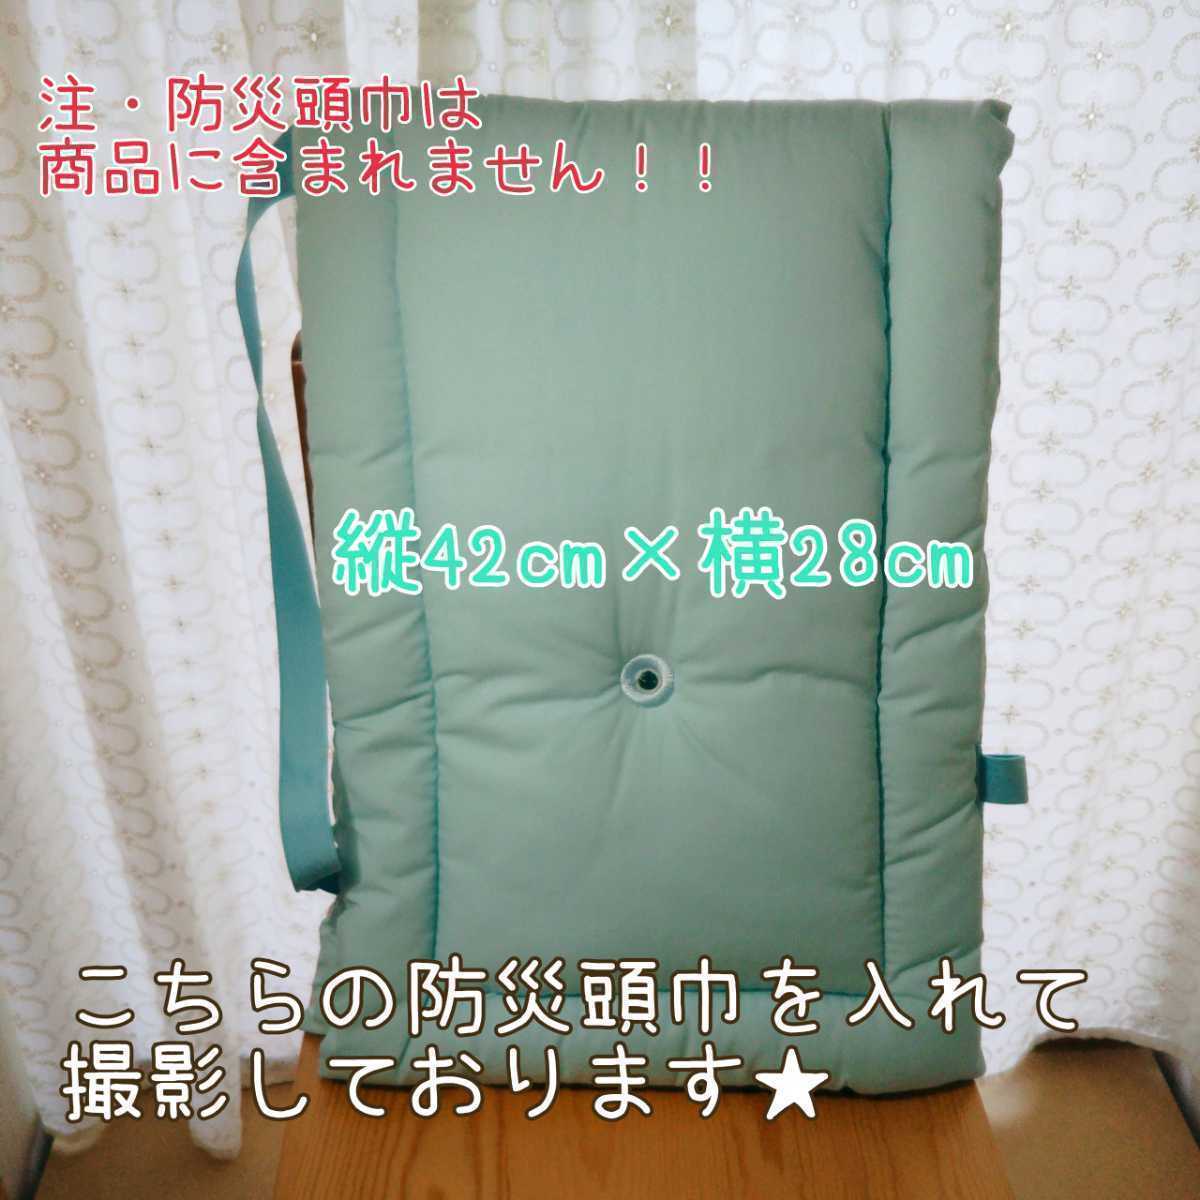  popular * disaster prevention head width cover .. sause type b356